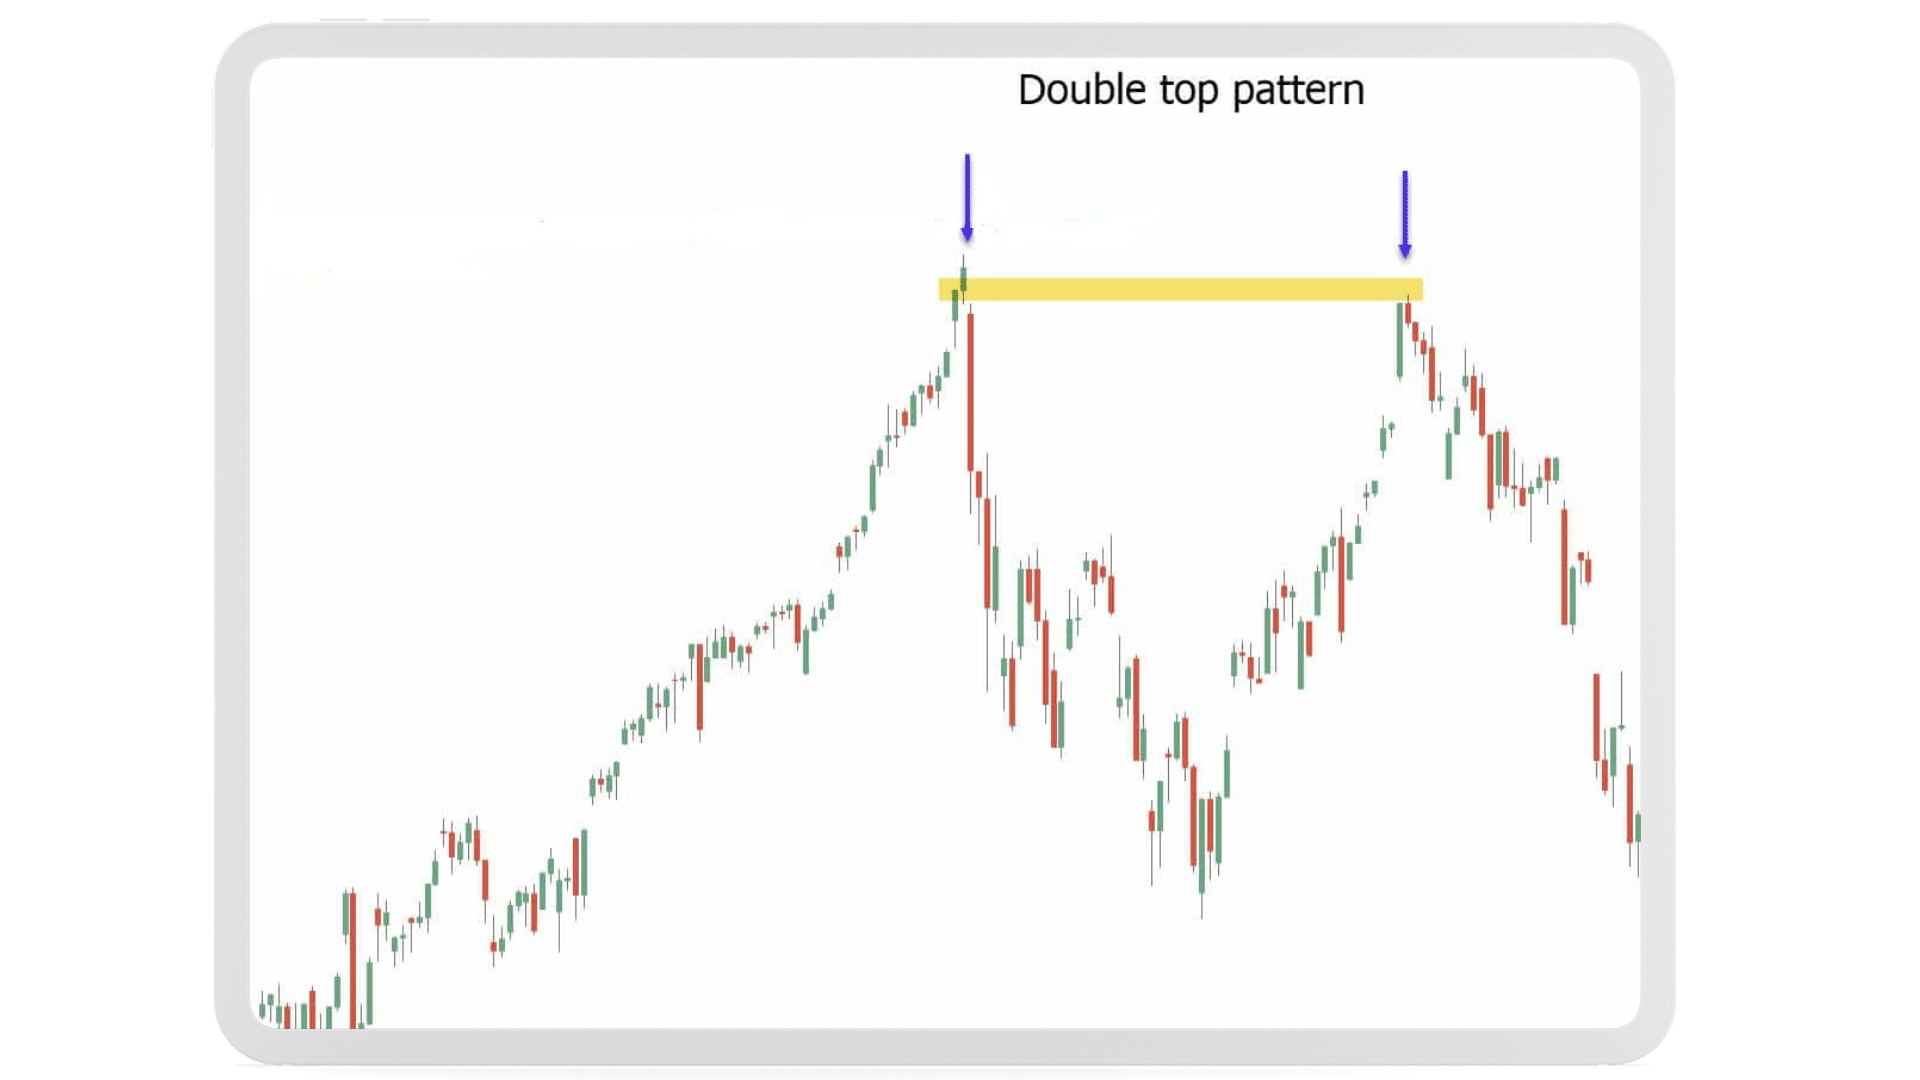 A chart showing a double top pattern in technical analysis